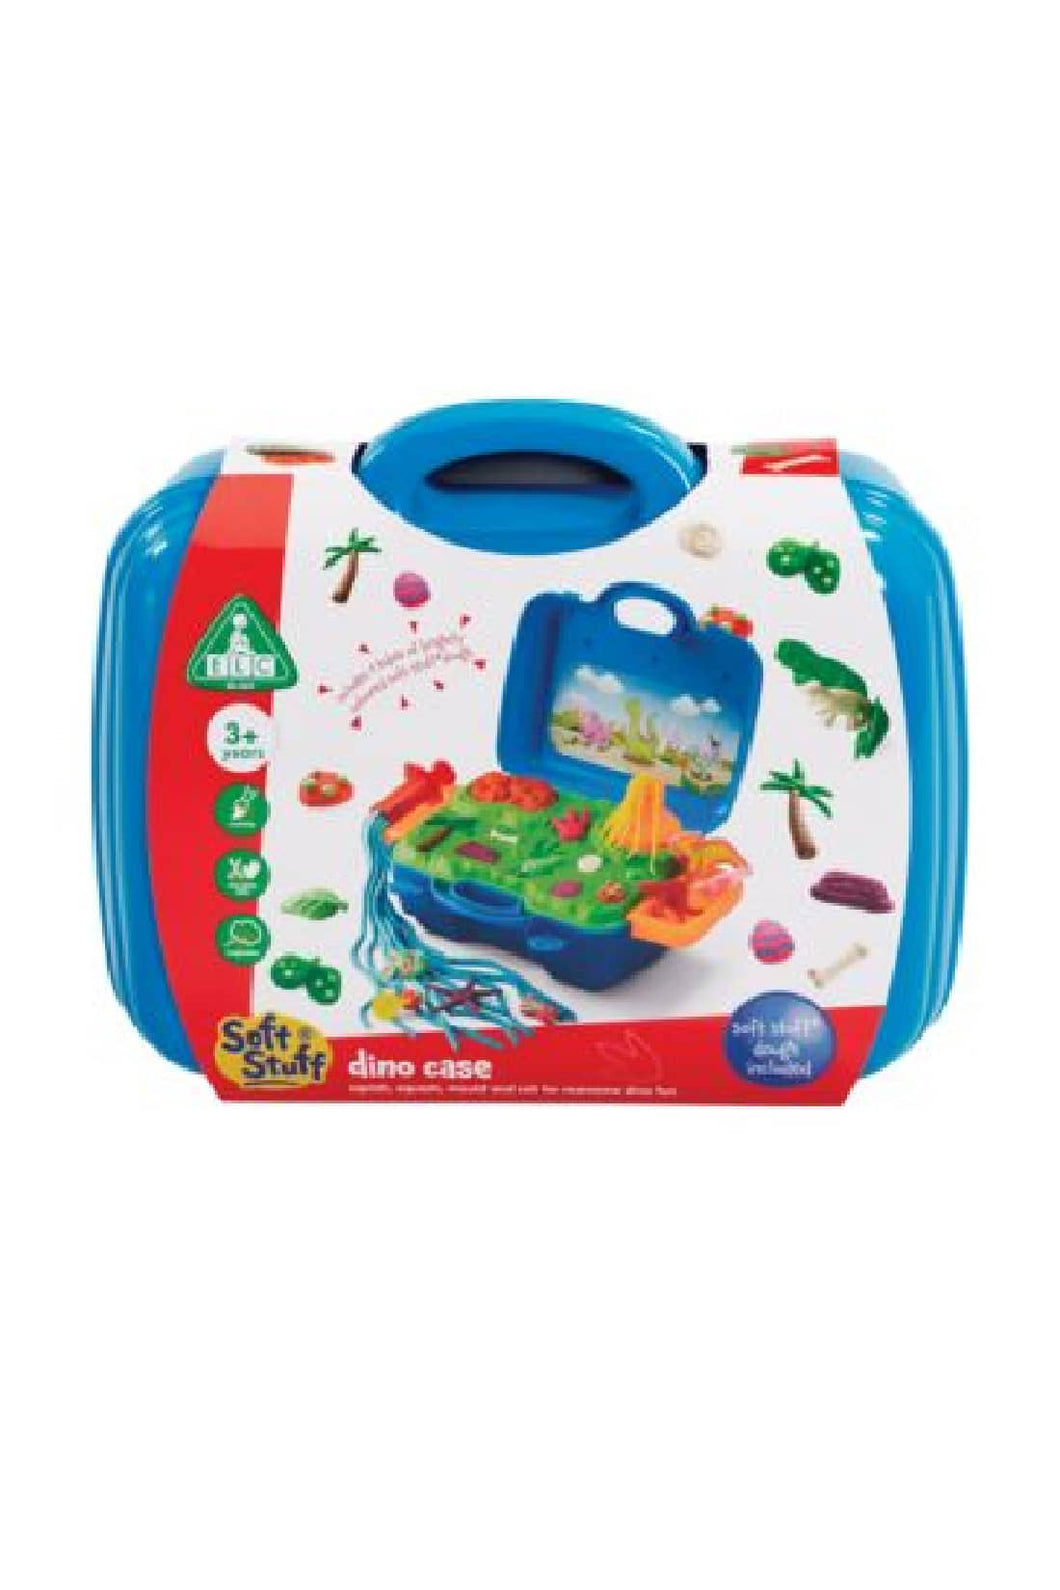 Early Learning Centre Soft Stuff Dino Case 